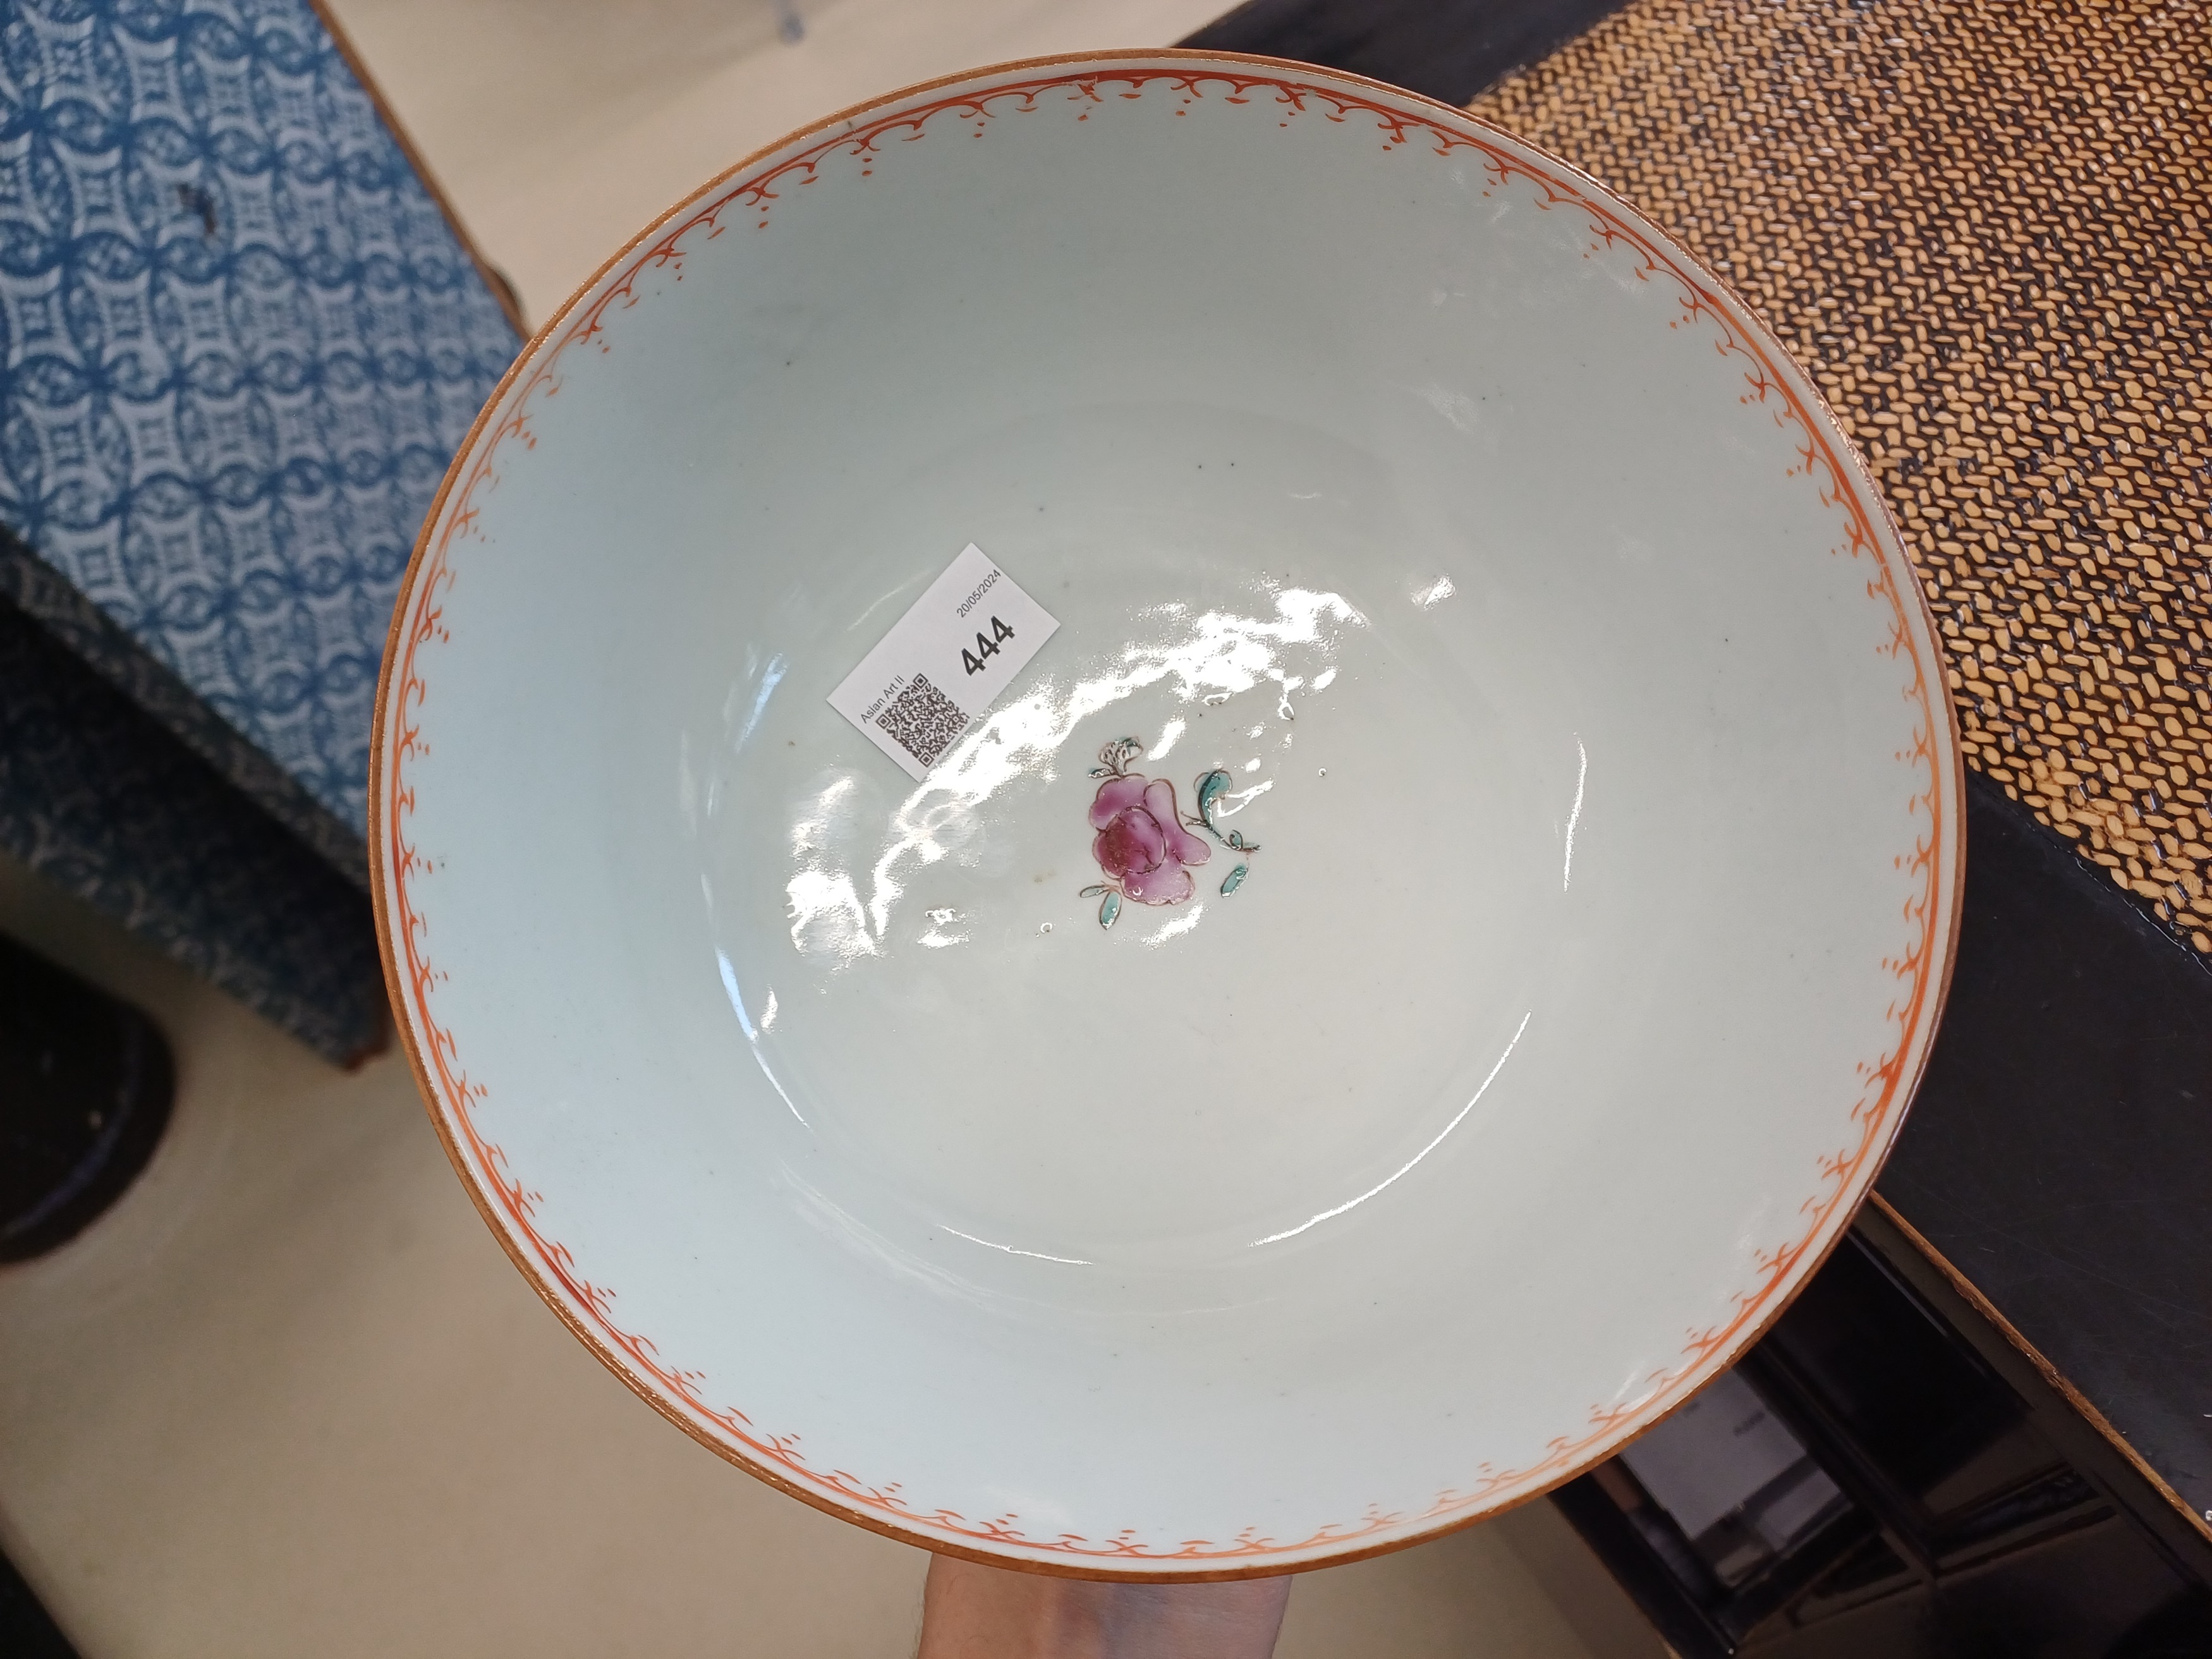 A SMALL CHINESE EXPORT FAMILLE-ROSE 'MANDARIN PALETTE' BOWL 清十八世紀 外銷粉彩人物故事圖紋盌 - Image 3 of 6